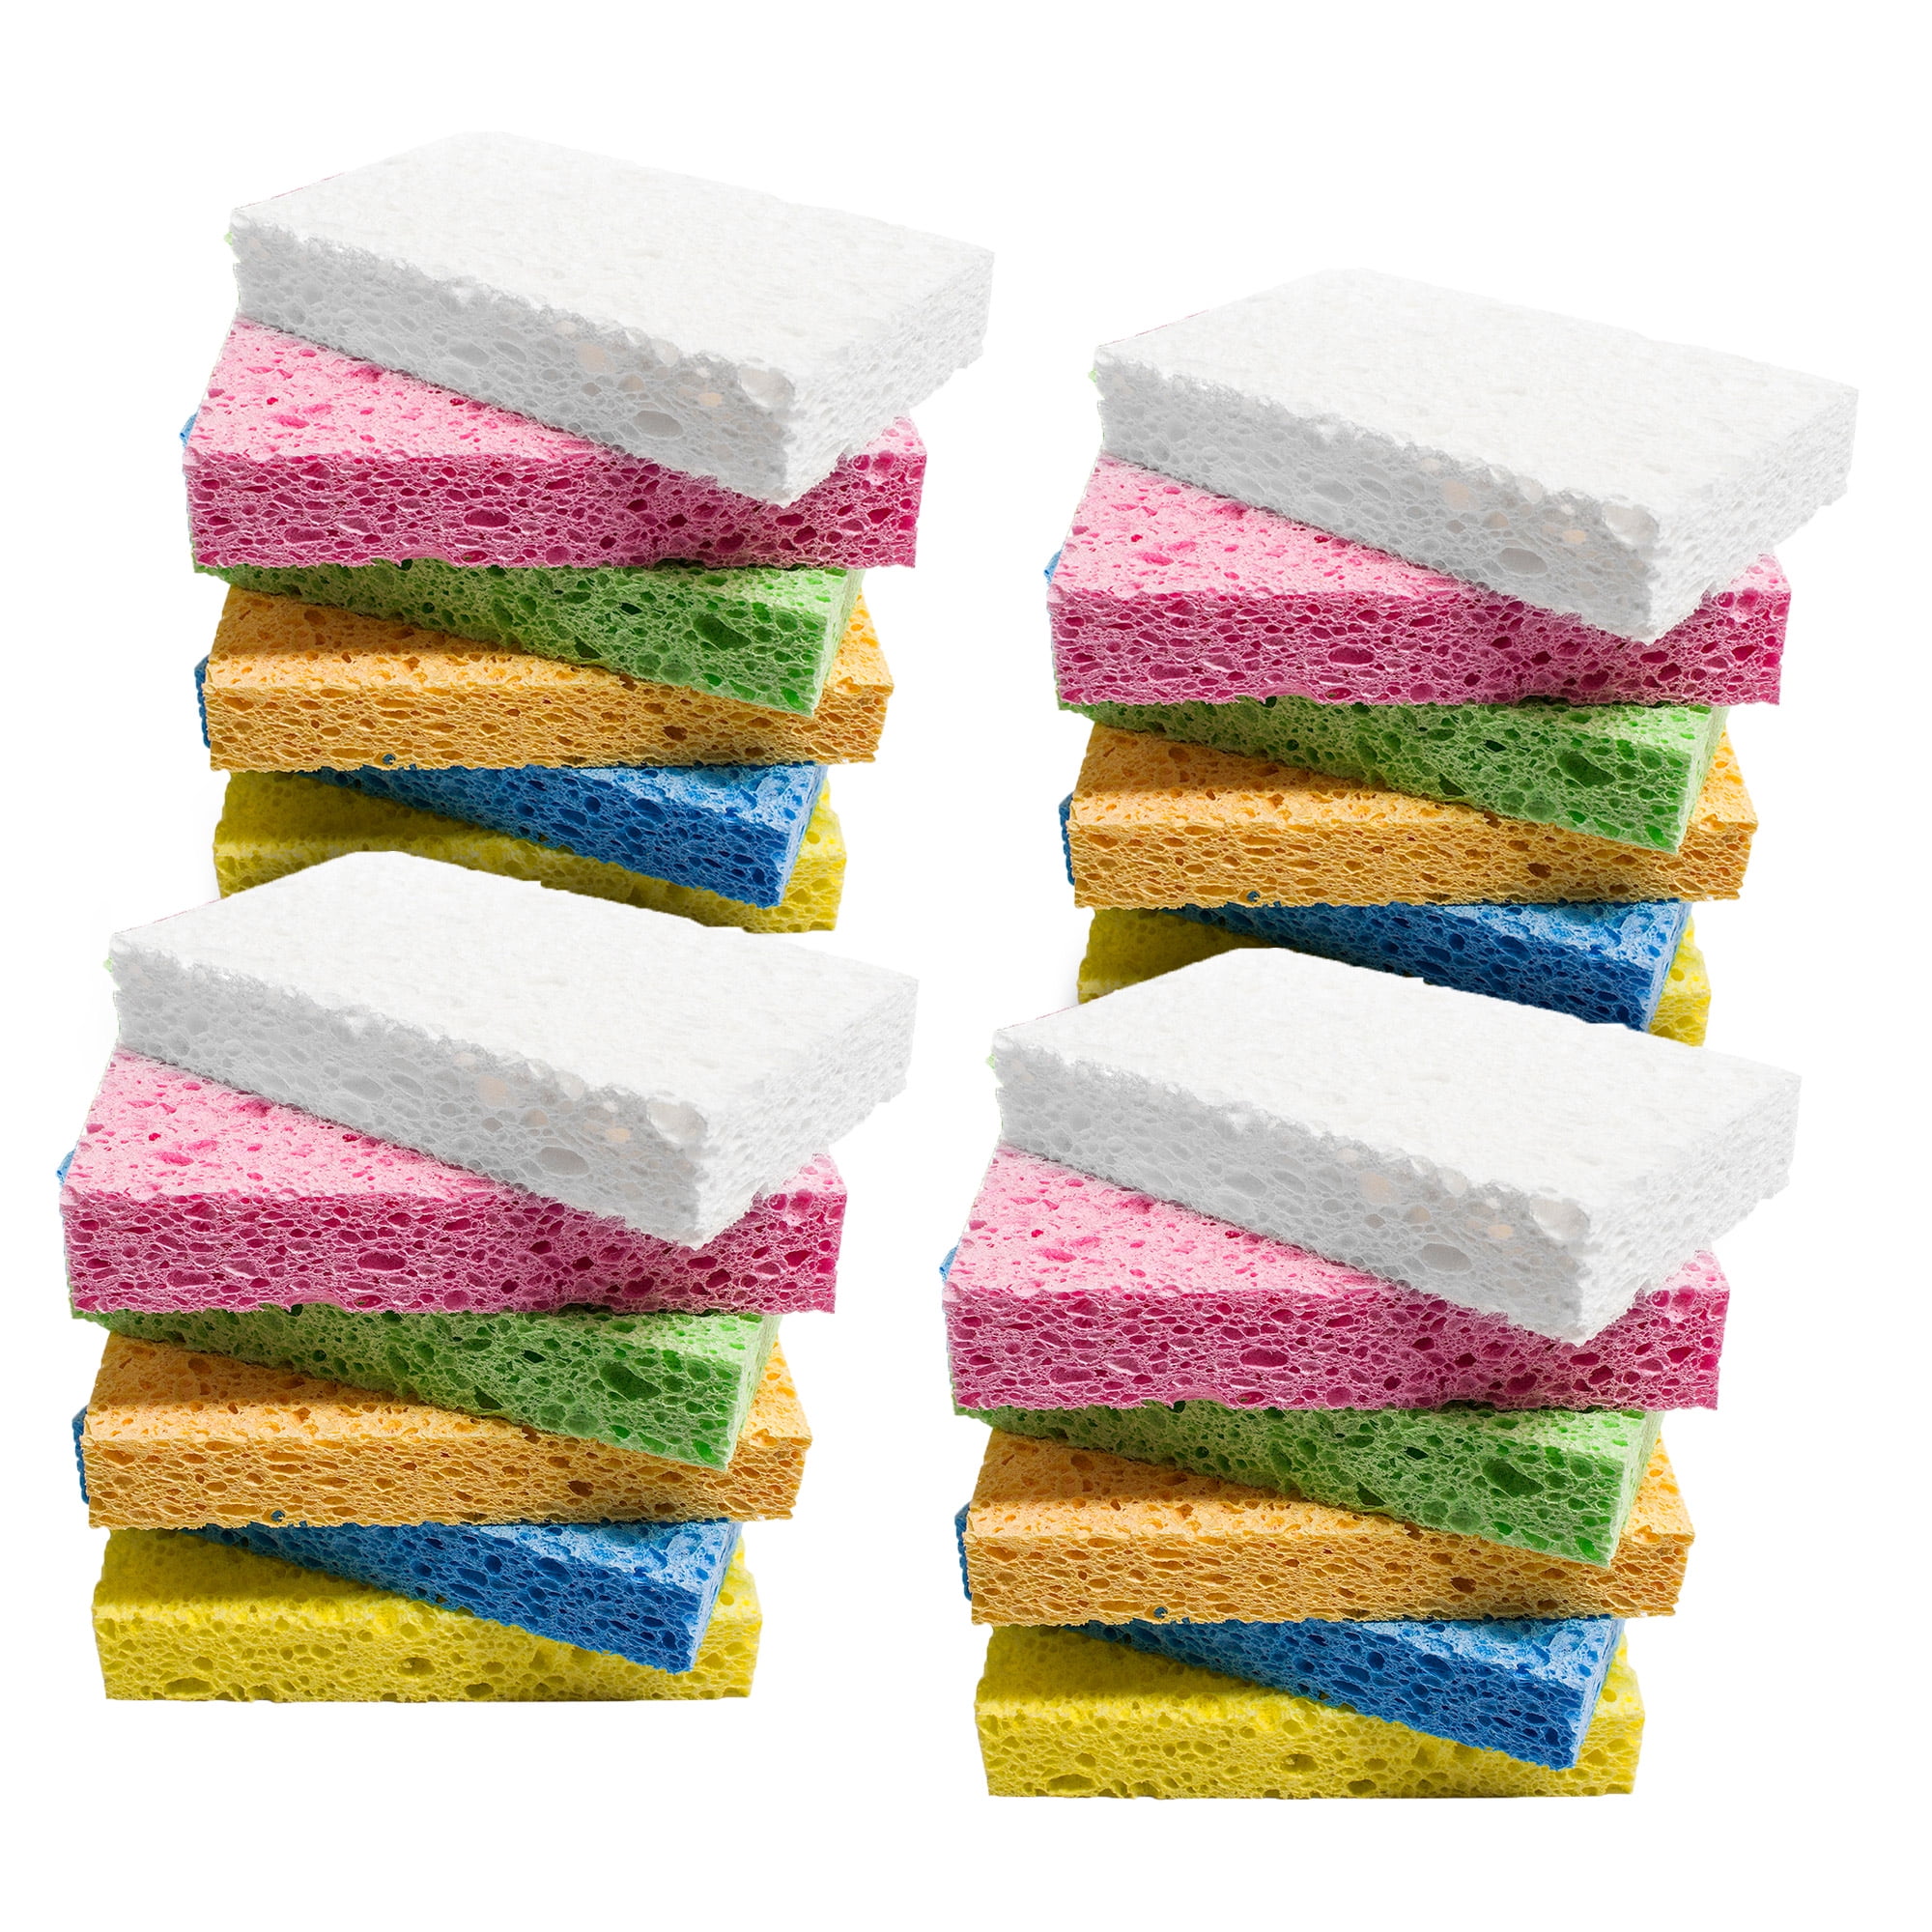 Kitchen Sponges- Compressed Cellulose Cleaning Sponges, Non-Scratch Dish Scrubber Sponge for Household,Highly Absorbent and Easy to Dry for Reuse